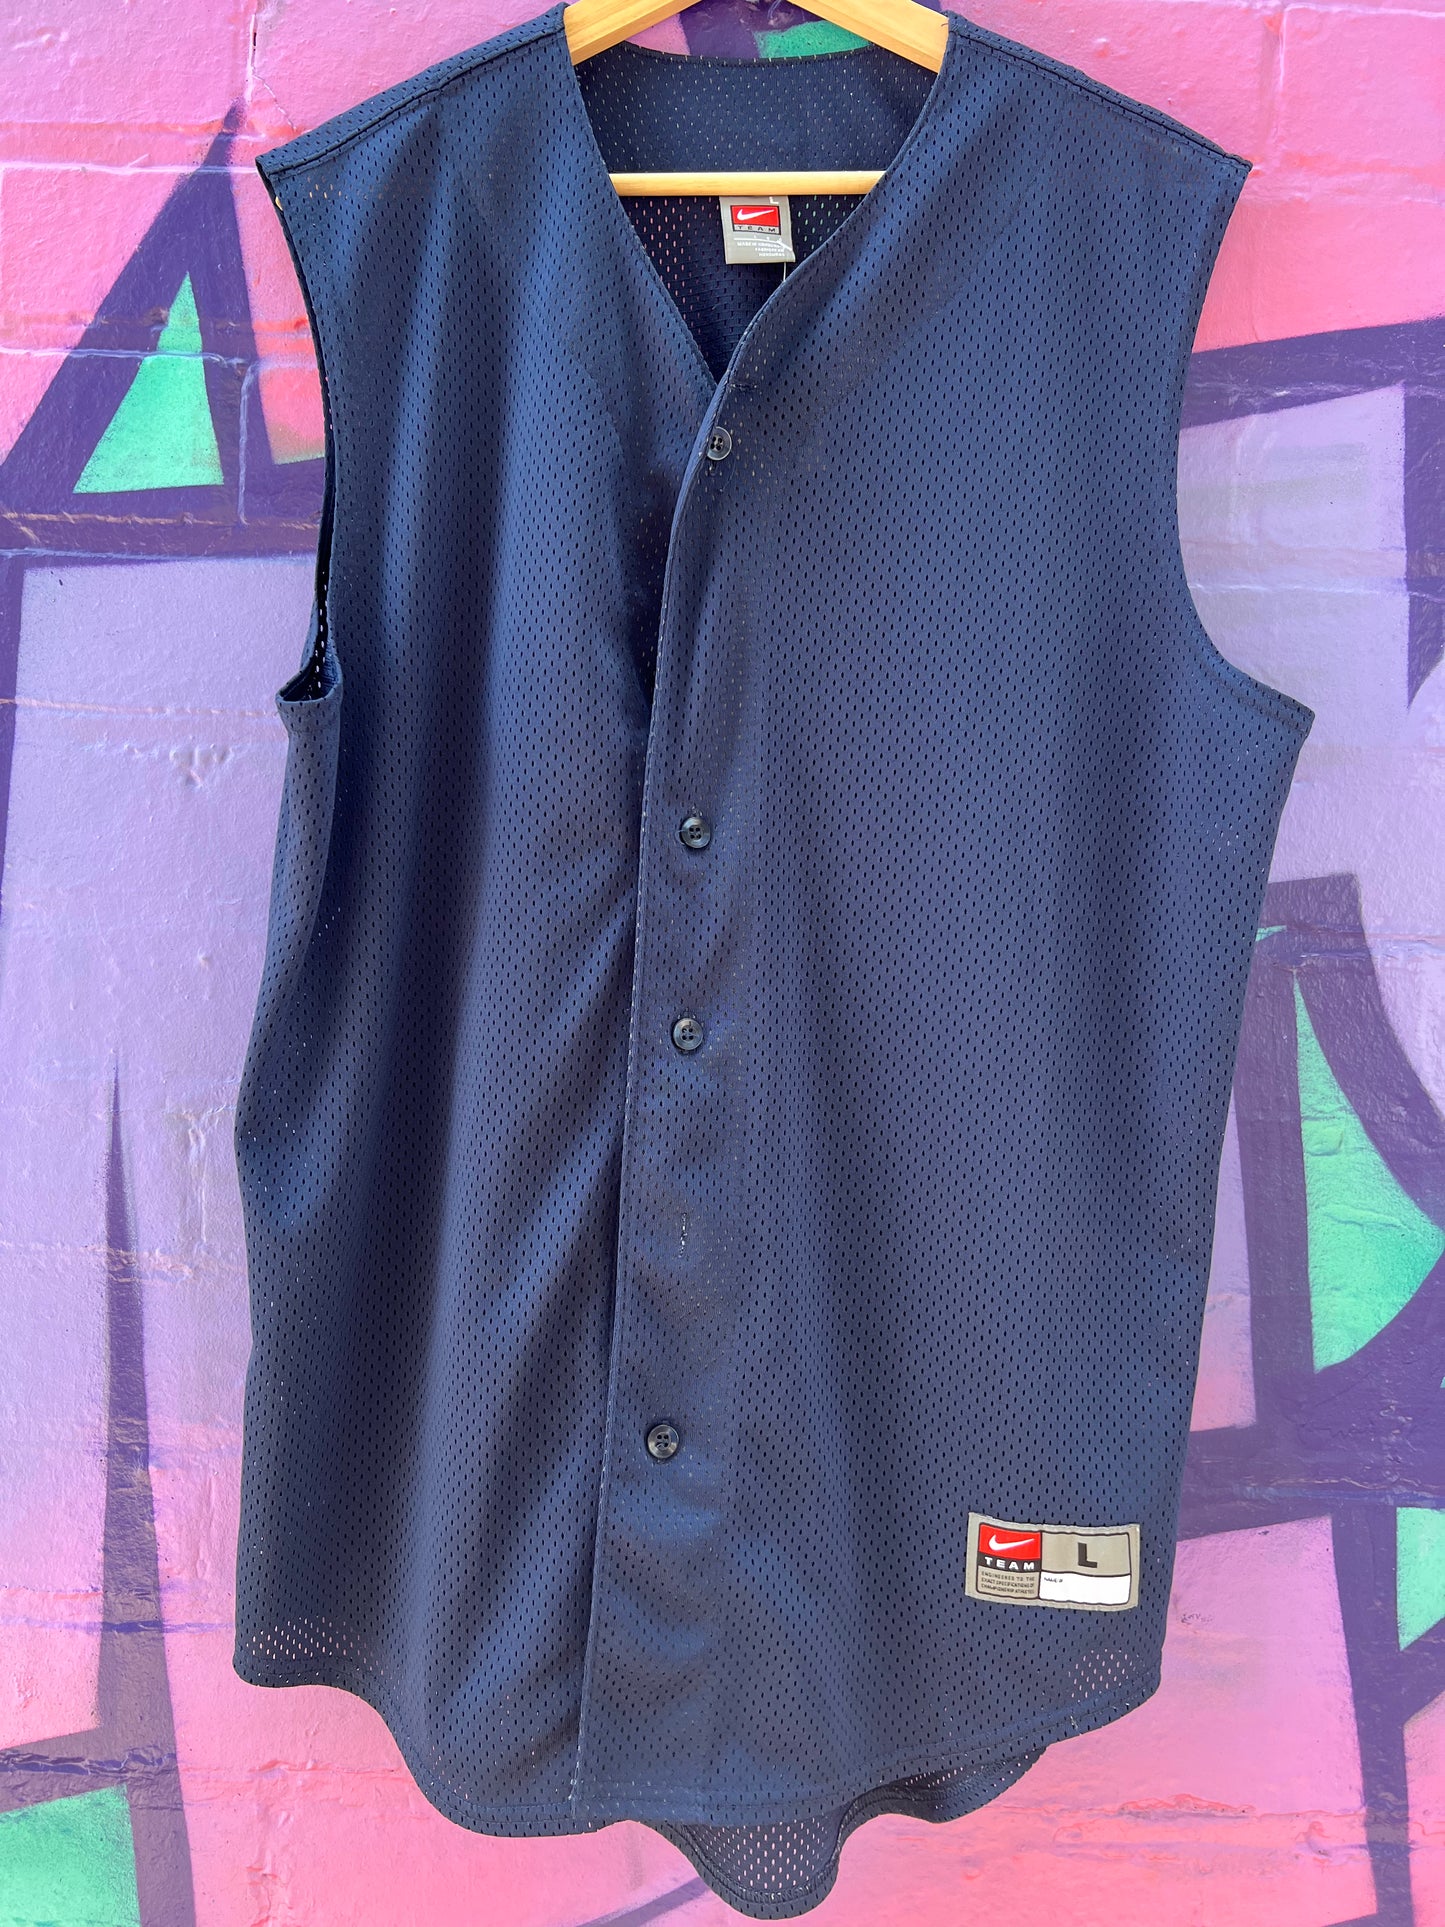 L - Nike Team Blue Button Up Netted Singlet